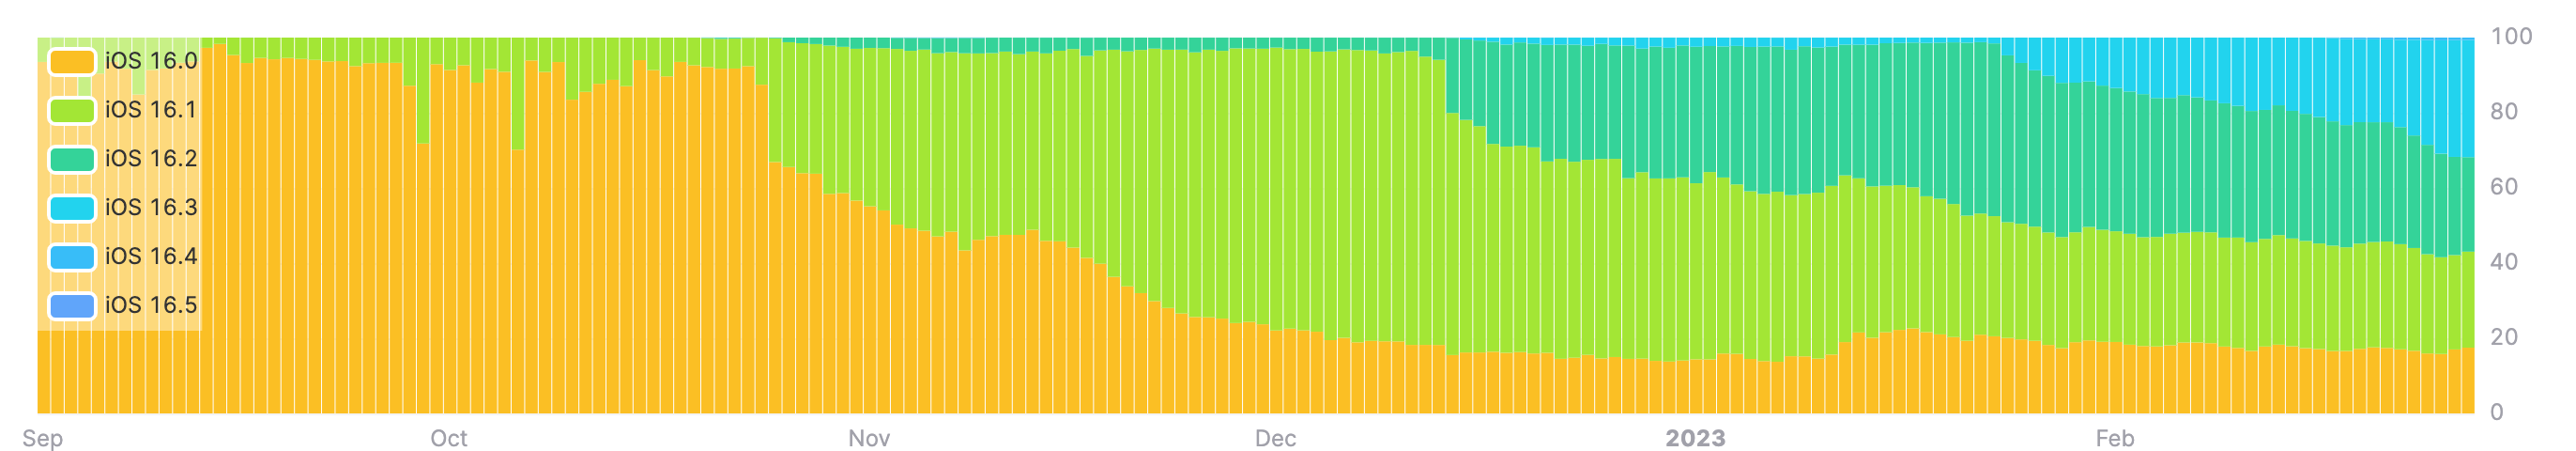 A chart of all iOS 16.* versions over time